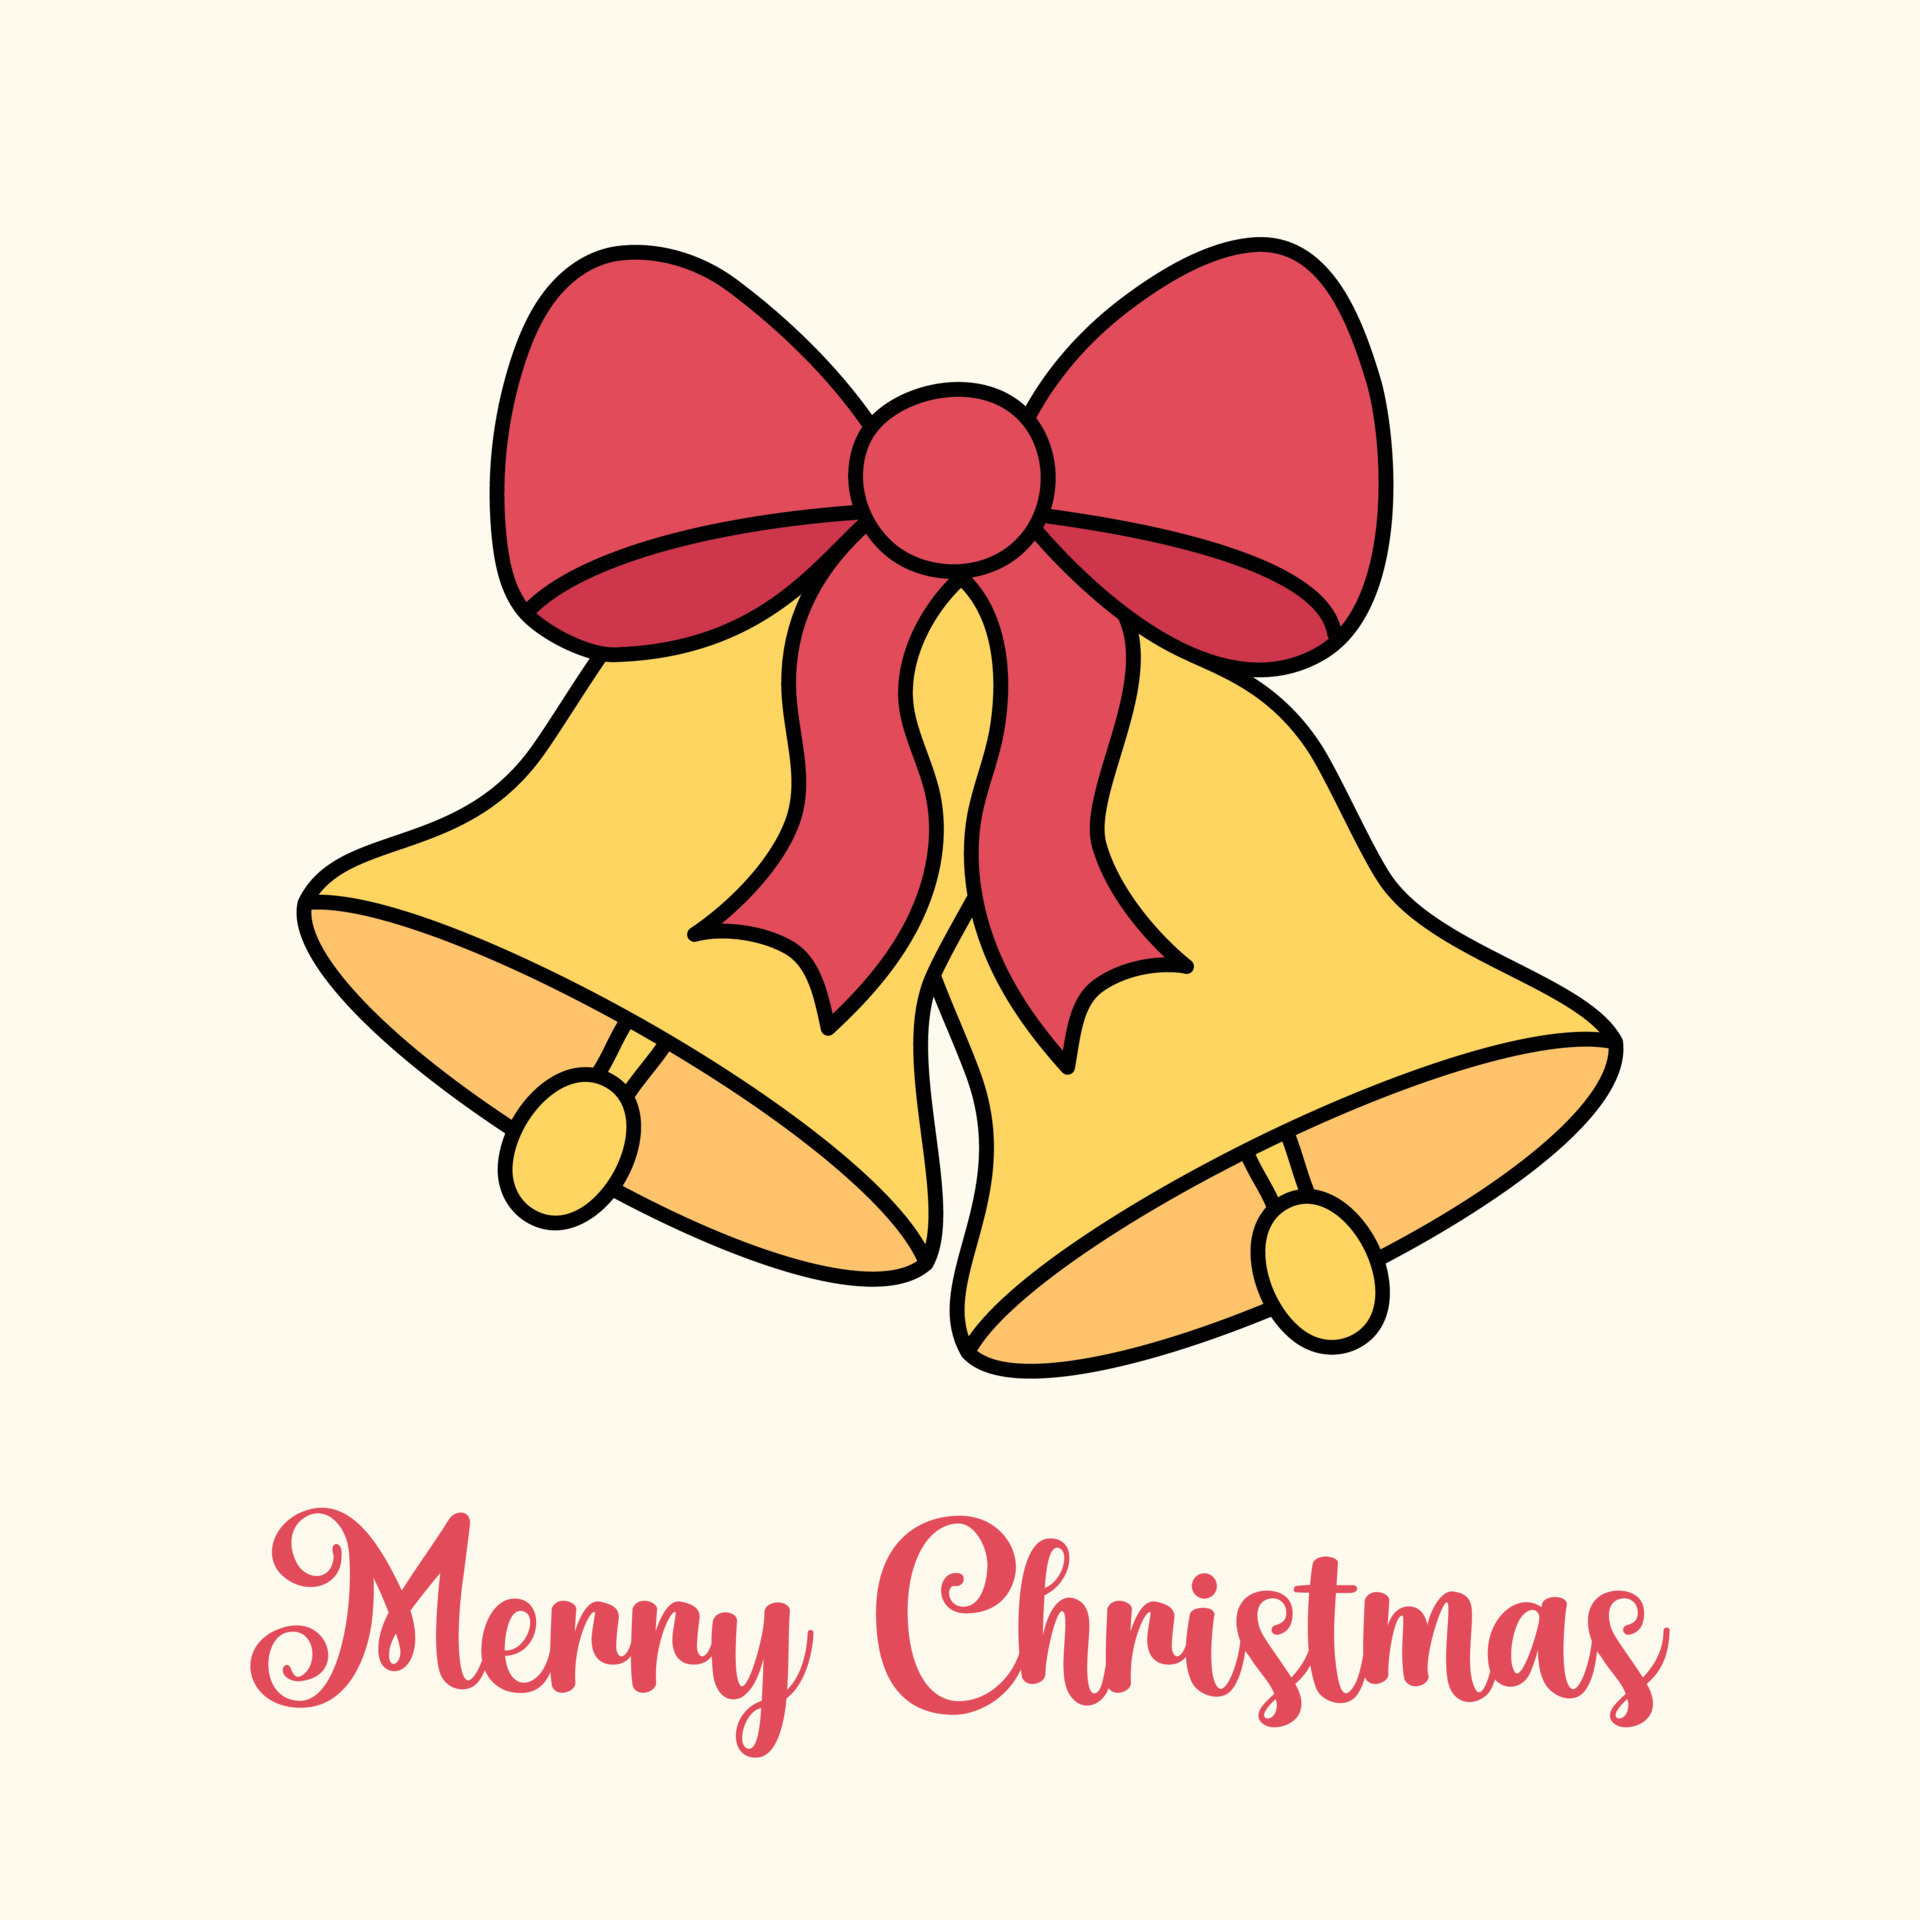 Cute Merry Chrismas greeting card with golden bells and bow